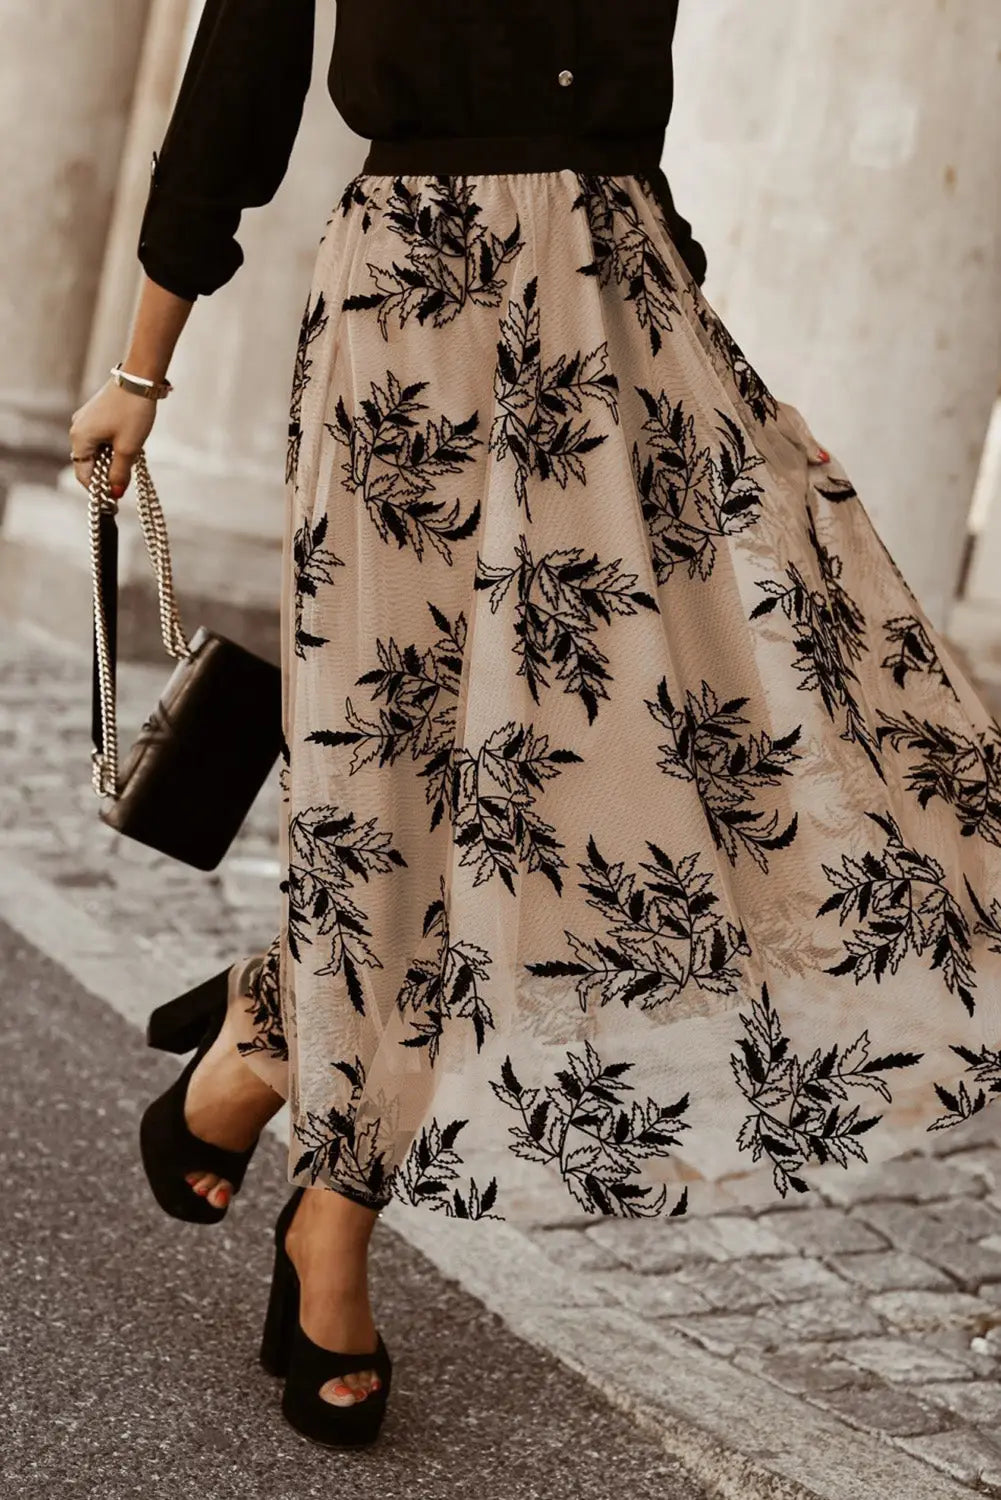 Apricot floral leaves embroidered high waist maxi skirt - skirts